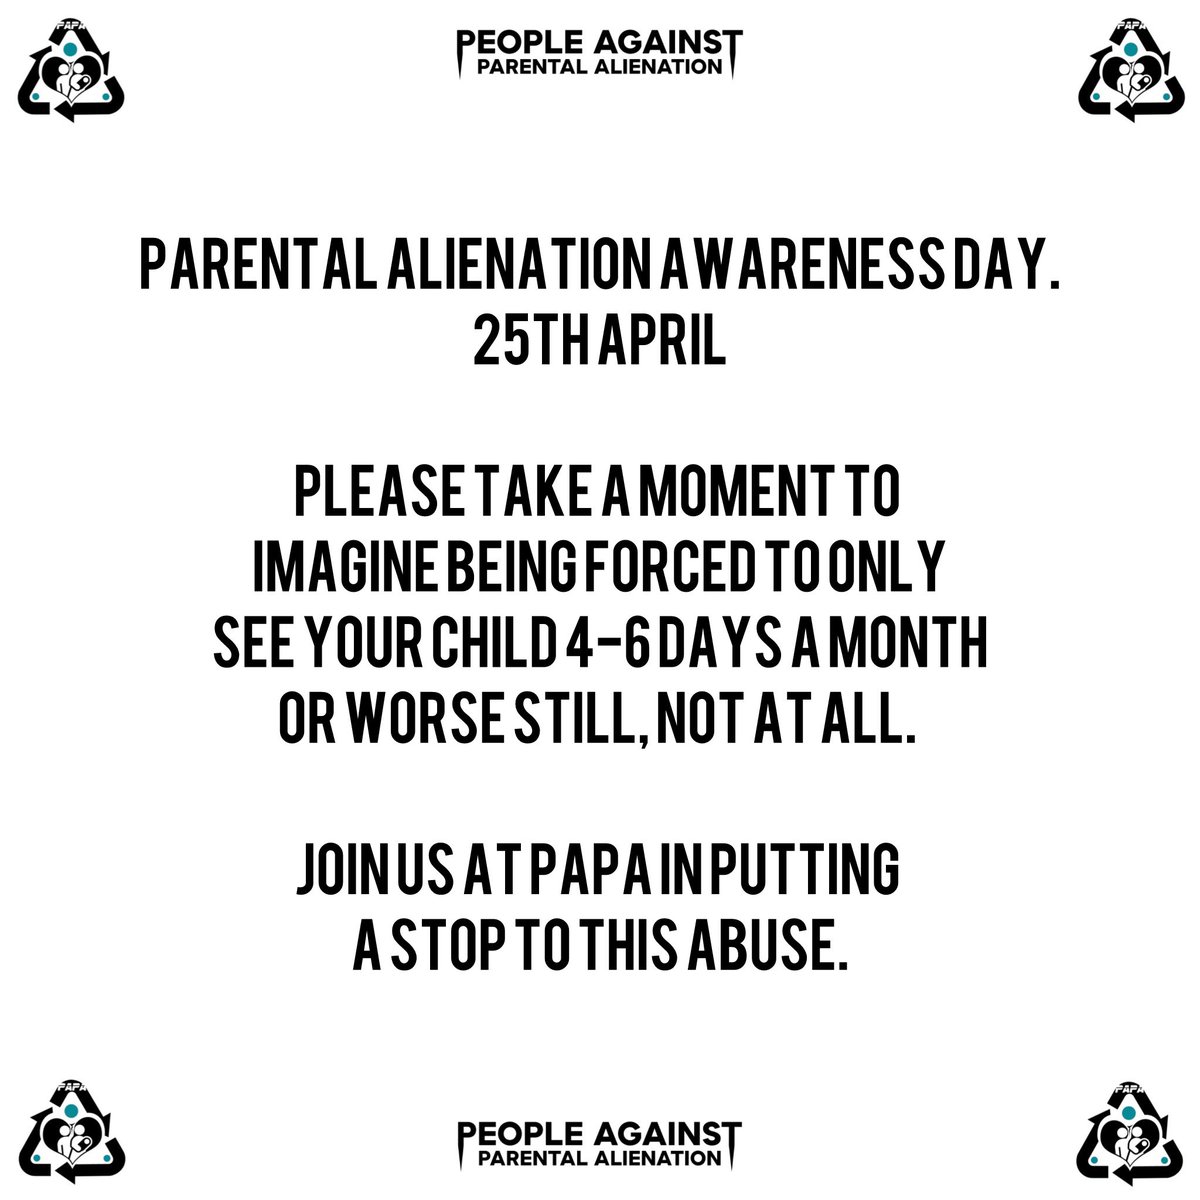 Join us at PAPA in putting stop to this abuse! 💪❤️♻️

papaorg.co.uk 

#papa #peopleagainstparentalalienation #parentalalienation #familylaw #familycourt